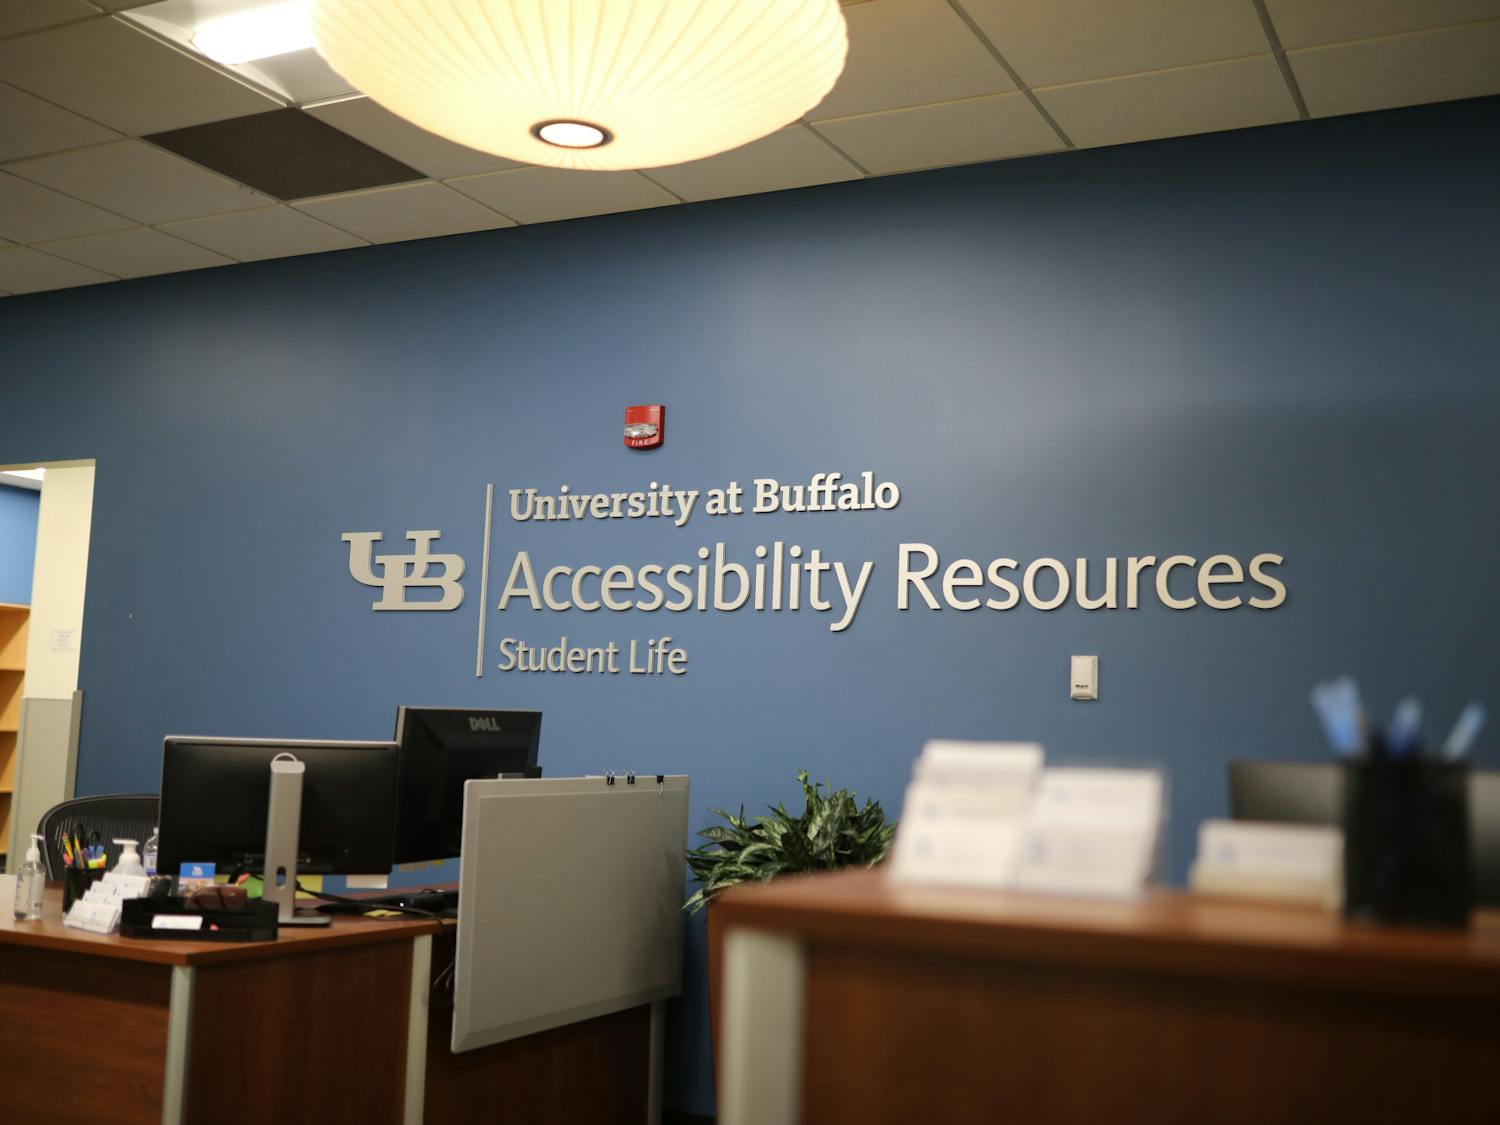 The North Campus Accessibility Resources office is located at 60 Capen Hall.